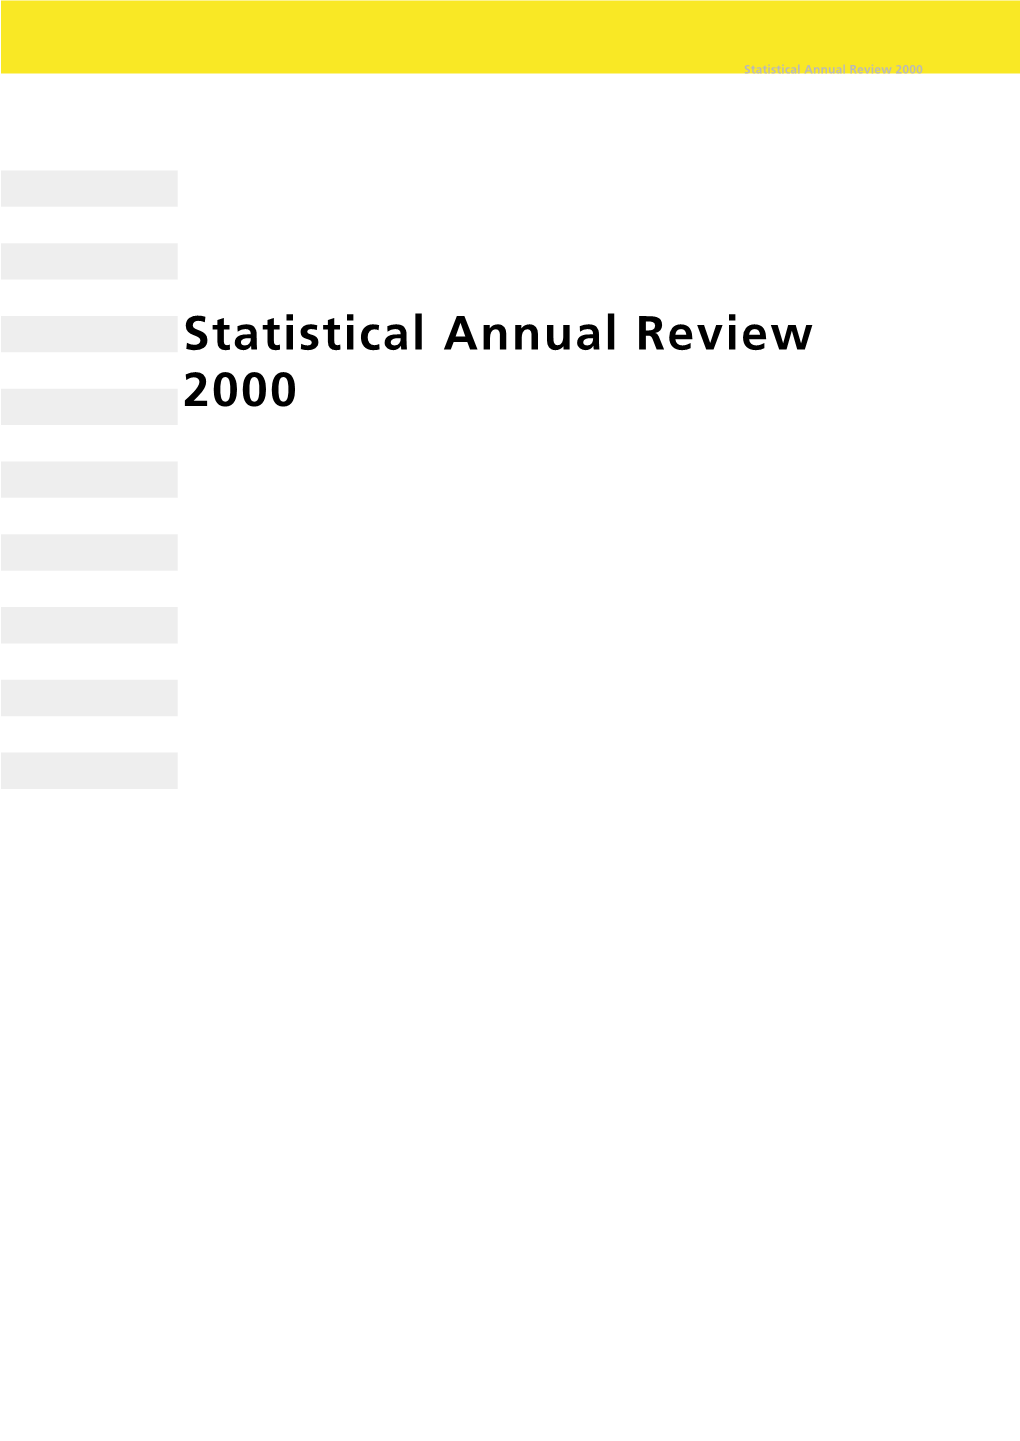 Statistical Annual Review 2000